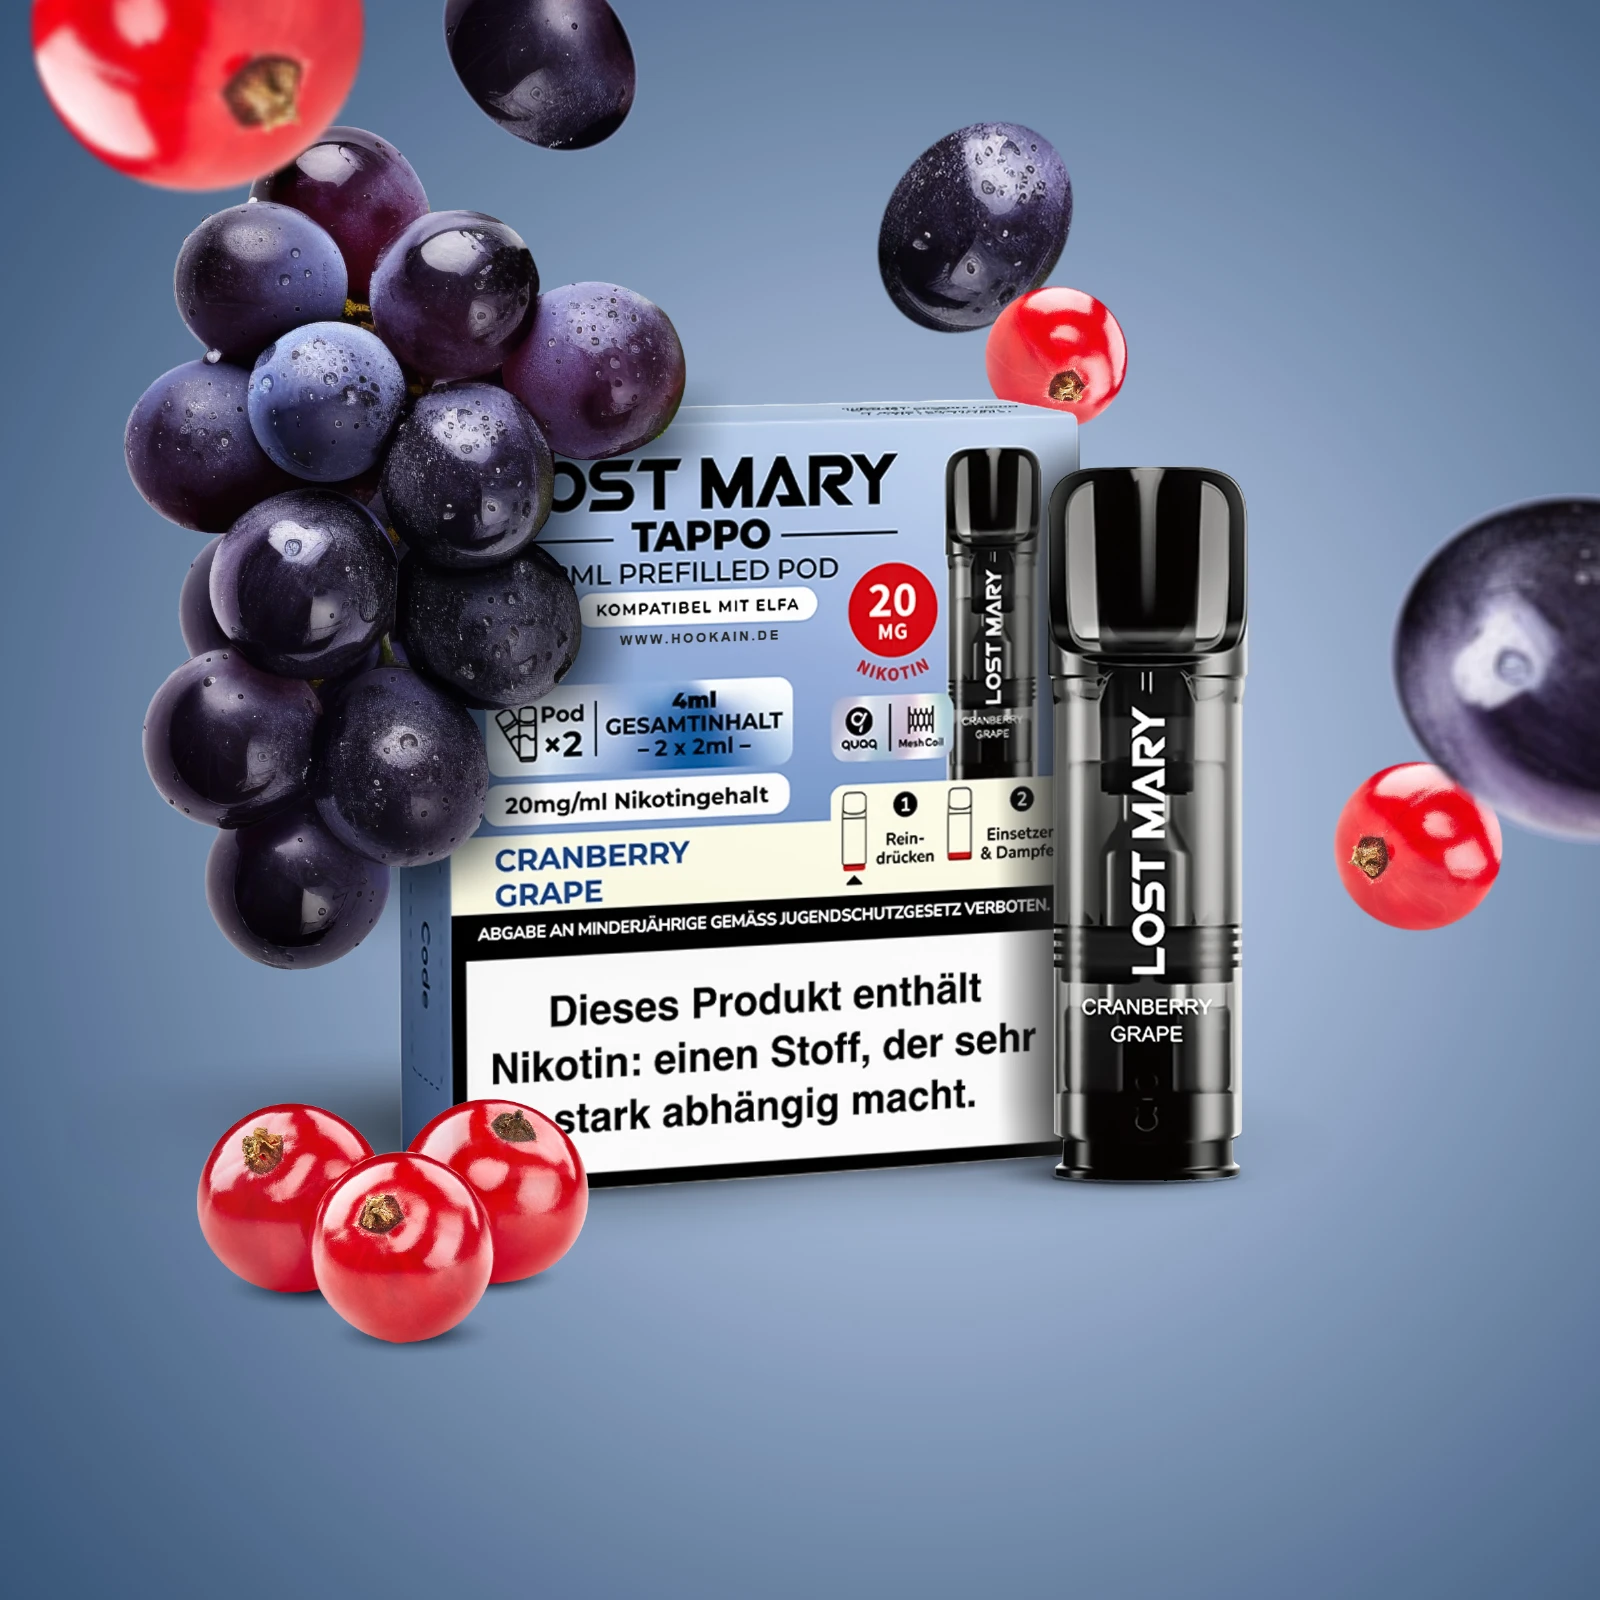 Lost Mary Tappo Cranberry Grape: Umweltfreundliches Pod-System mit Prefilled Pods